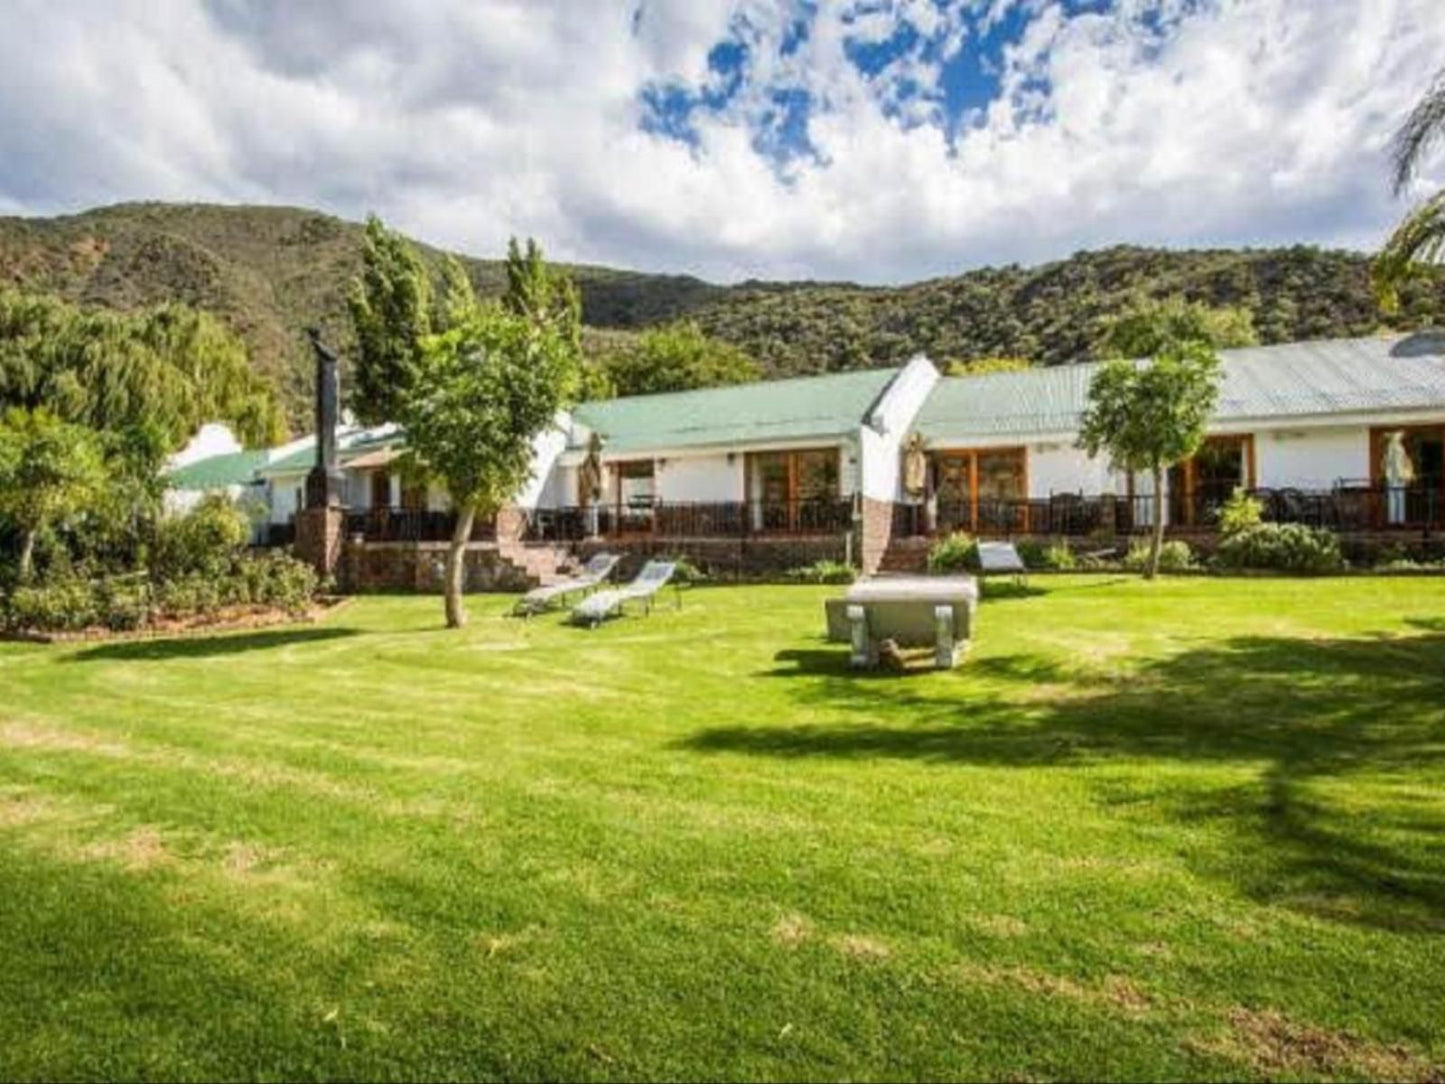 De Oude Meul Country Lodge Oudtshoorn Western Cape South Africa House, Building, Architecture, Garden, Nature, Plant, Highland